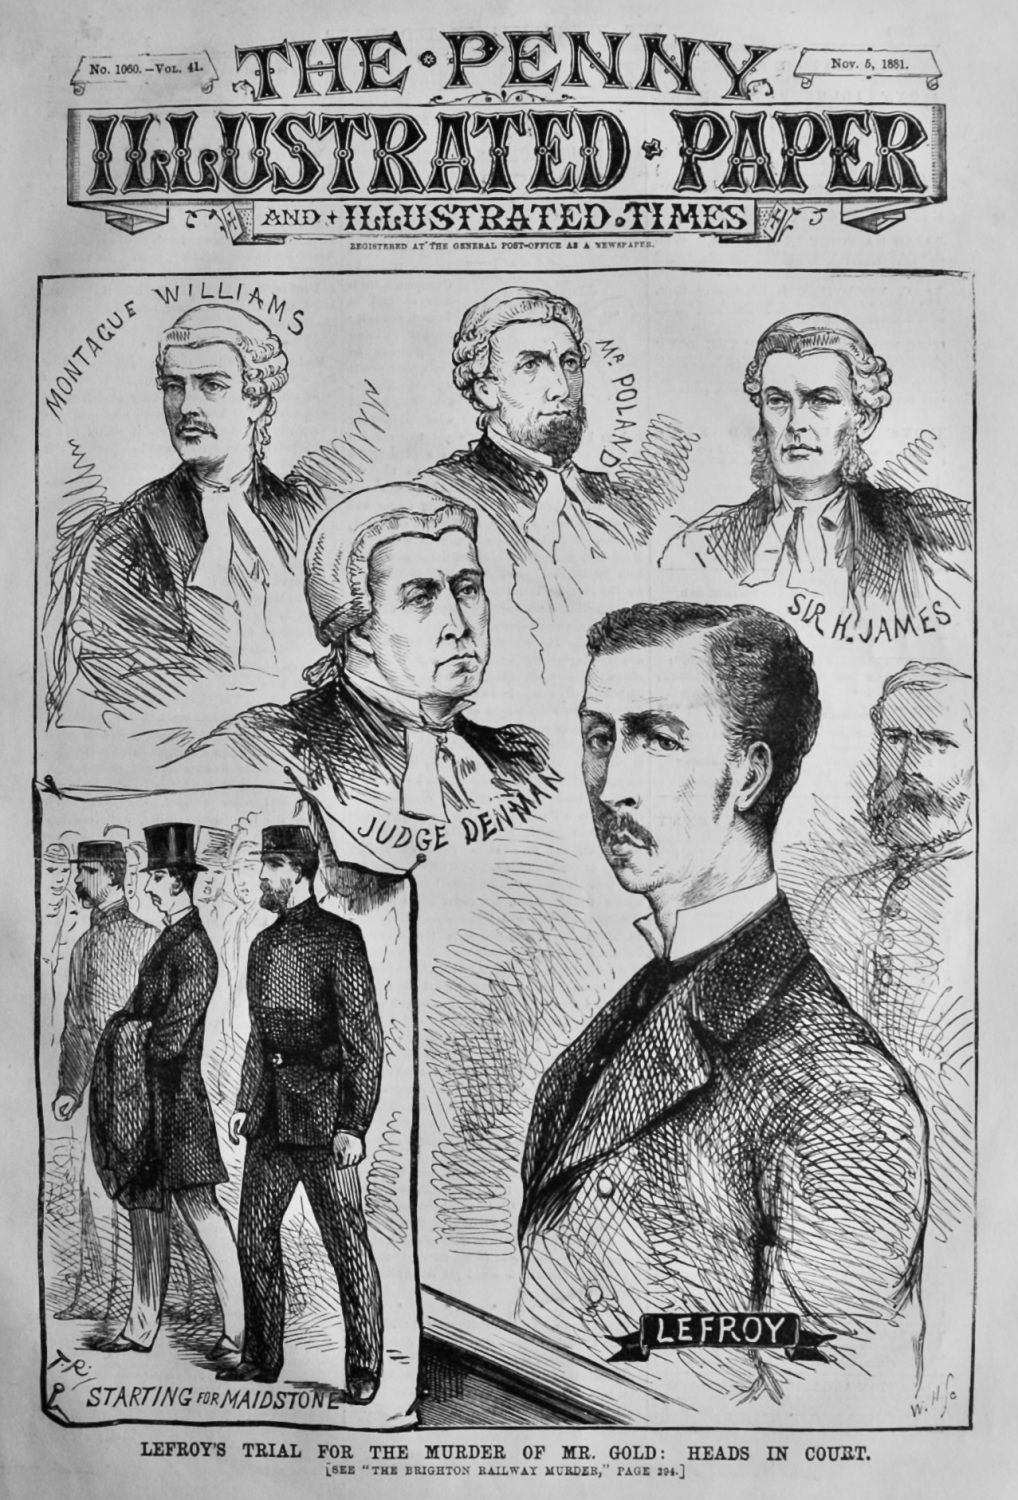 Lefroy's Trial for the Murder of Mr. Gold :  Heads in Court.  1881.